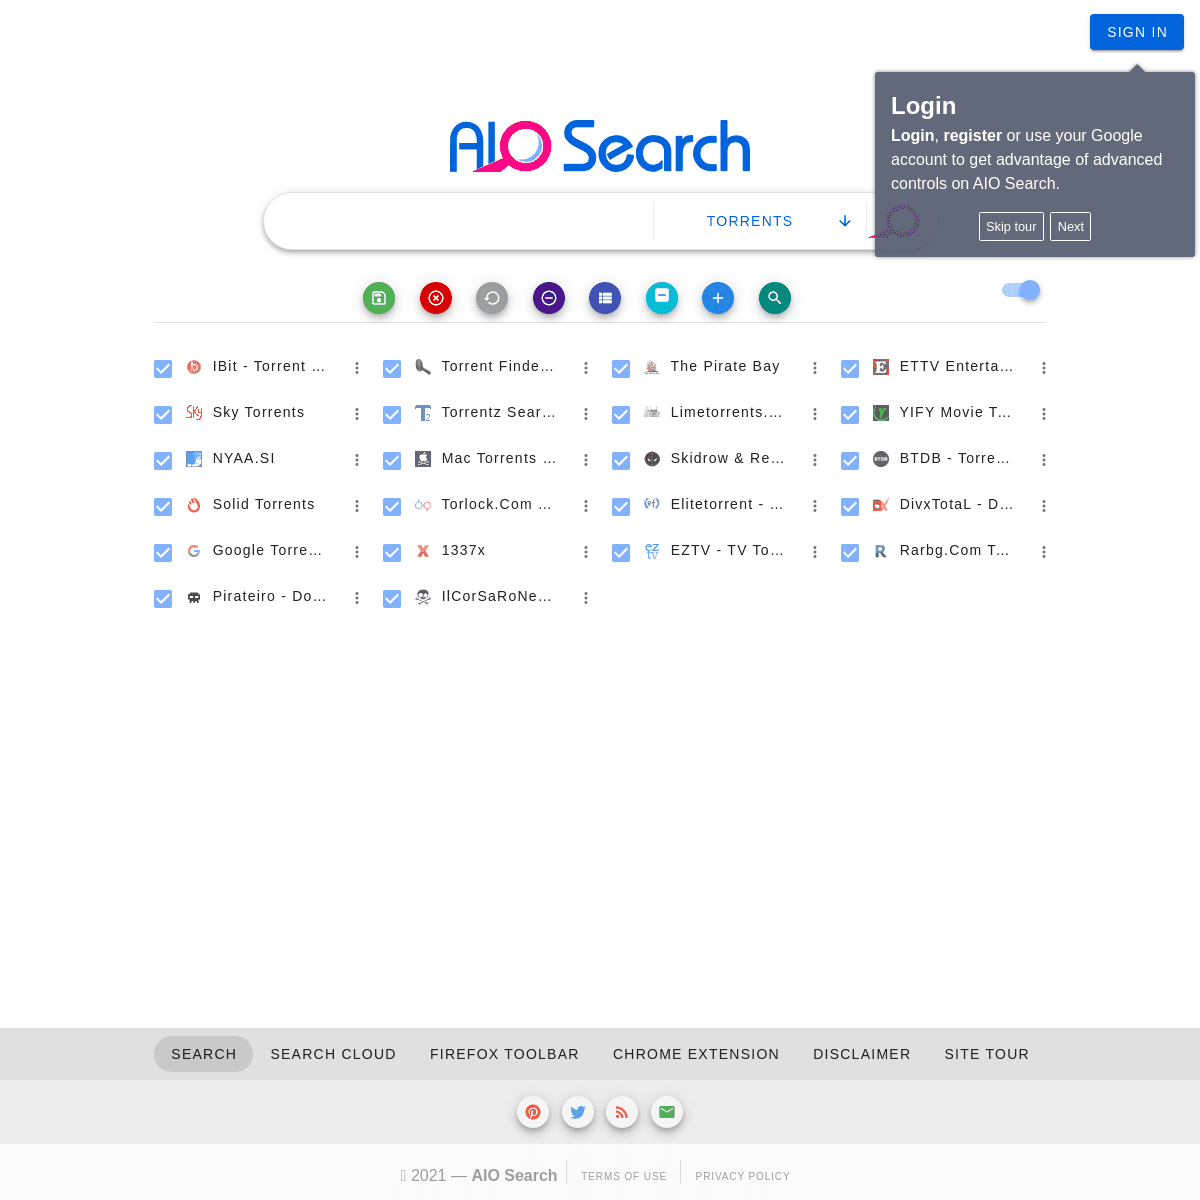 A complete backup of https://aiosearch.com